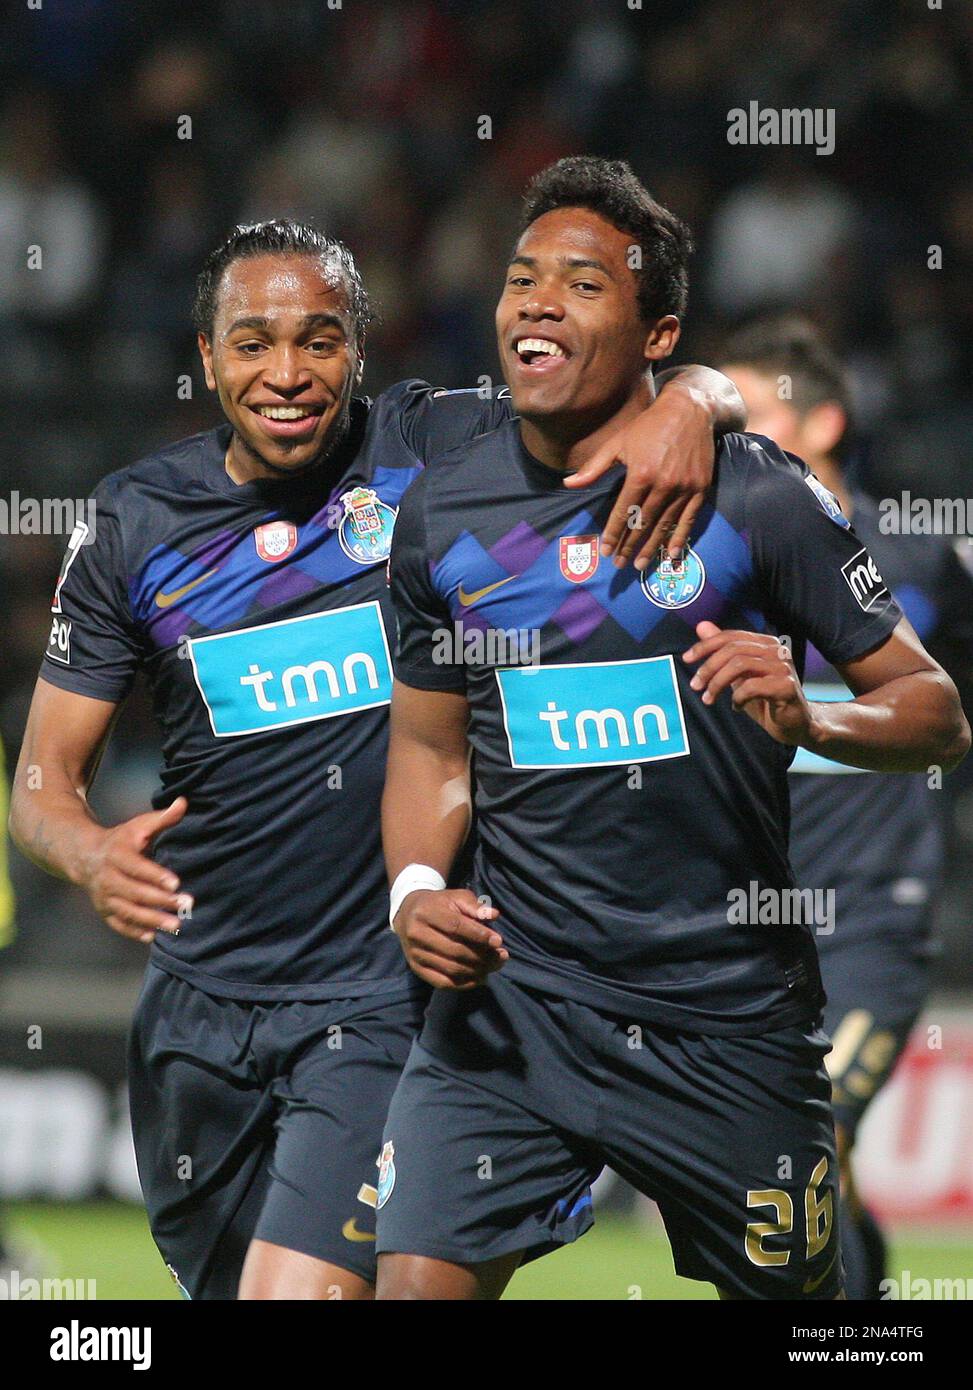 FC Porto's Alex Sandro, right, from Brazil celebrates with Alvaro Pereira,  from Uruguay, after scoring his team second goal against Nacional during  their Portuguese League soccer match at Nacional's stadium outside Funchal,